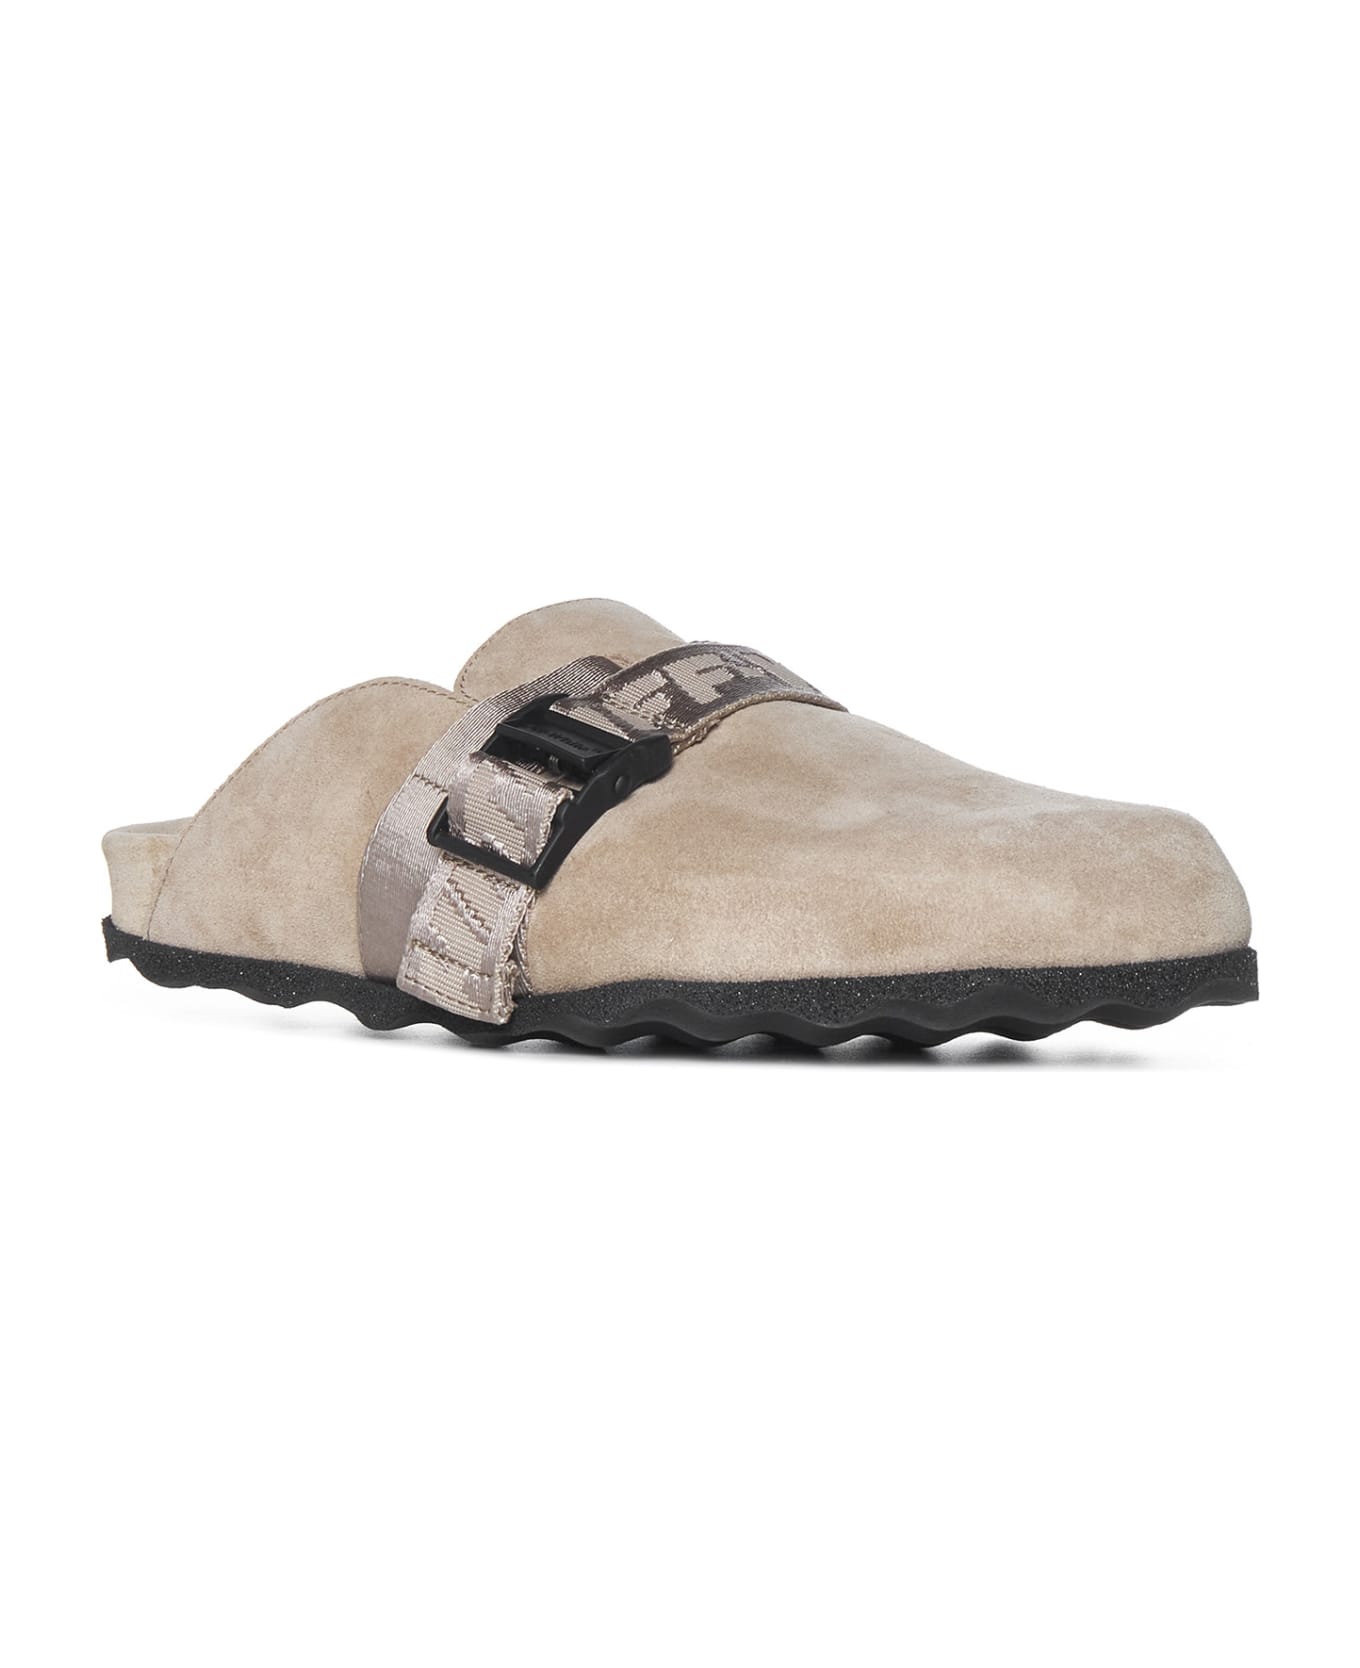 Off-White Flat Shoes - Sand sand